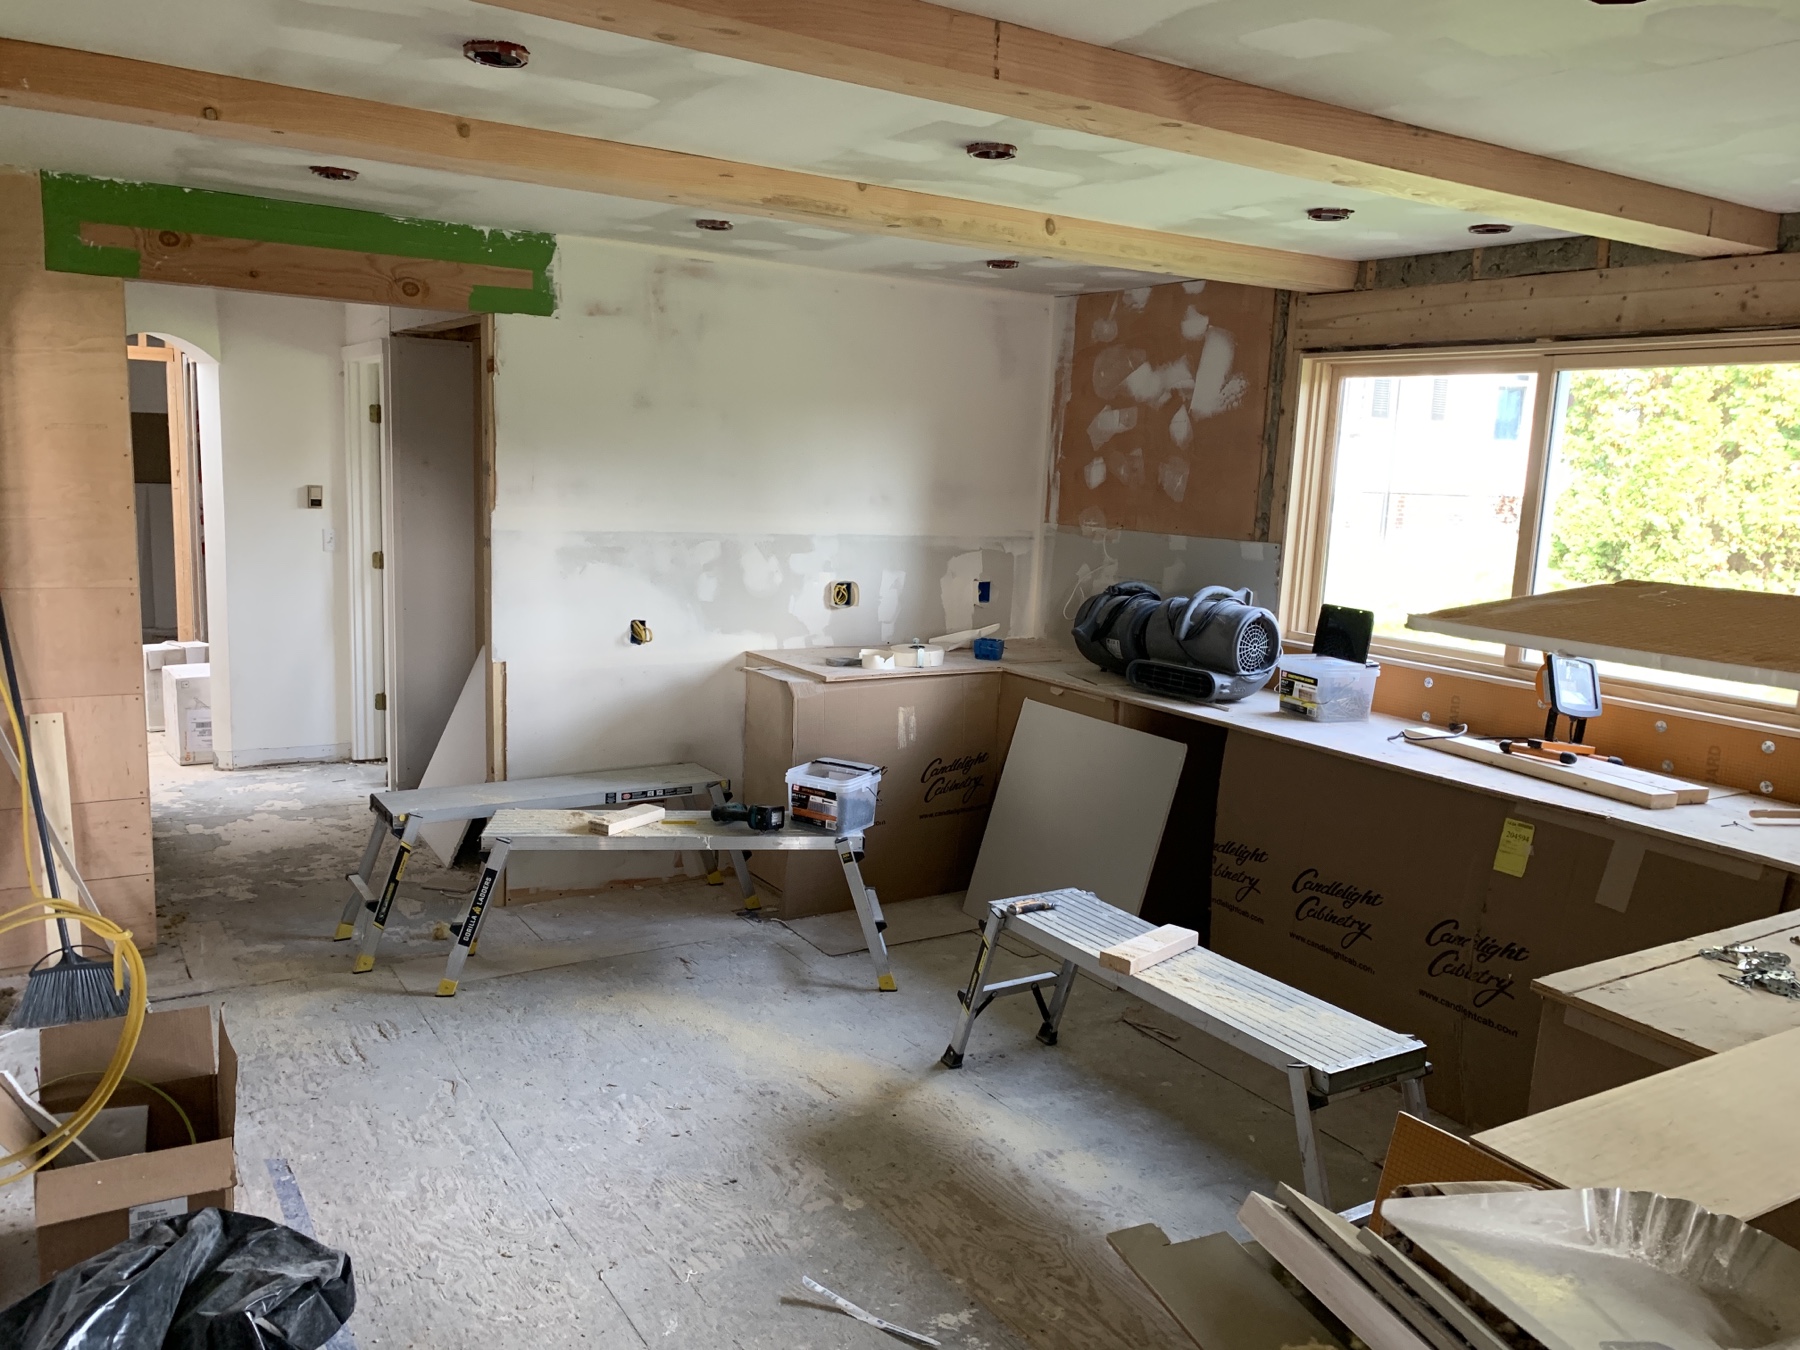 kitchen with subfloor and bare walls showing